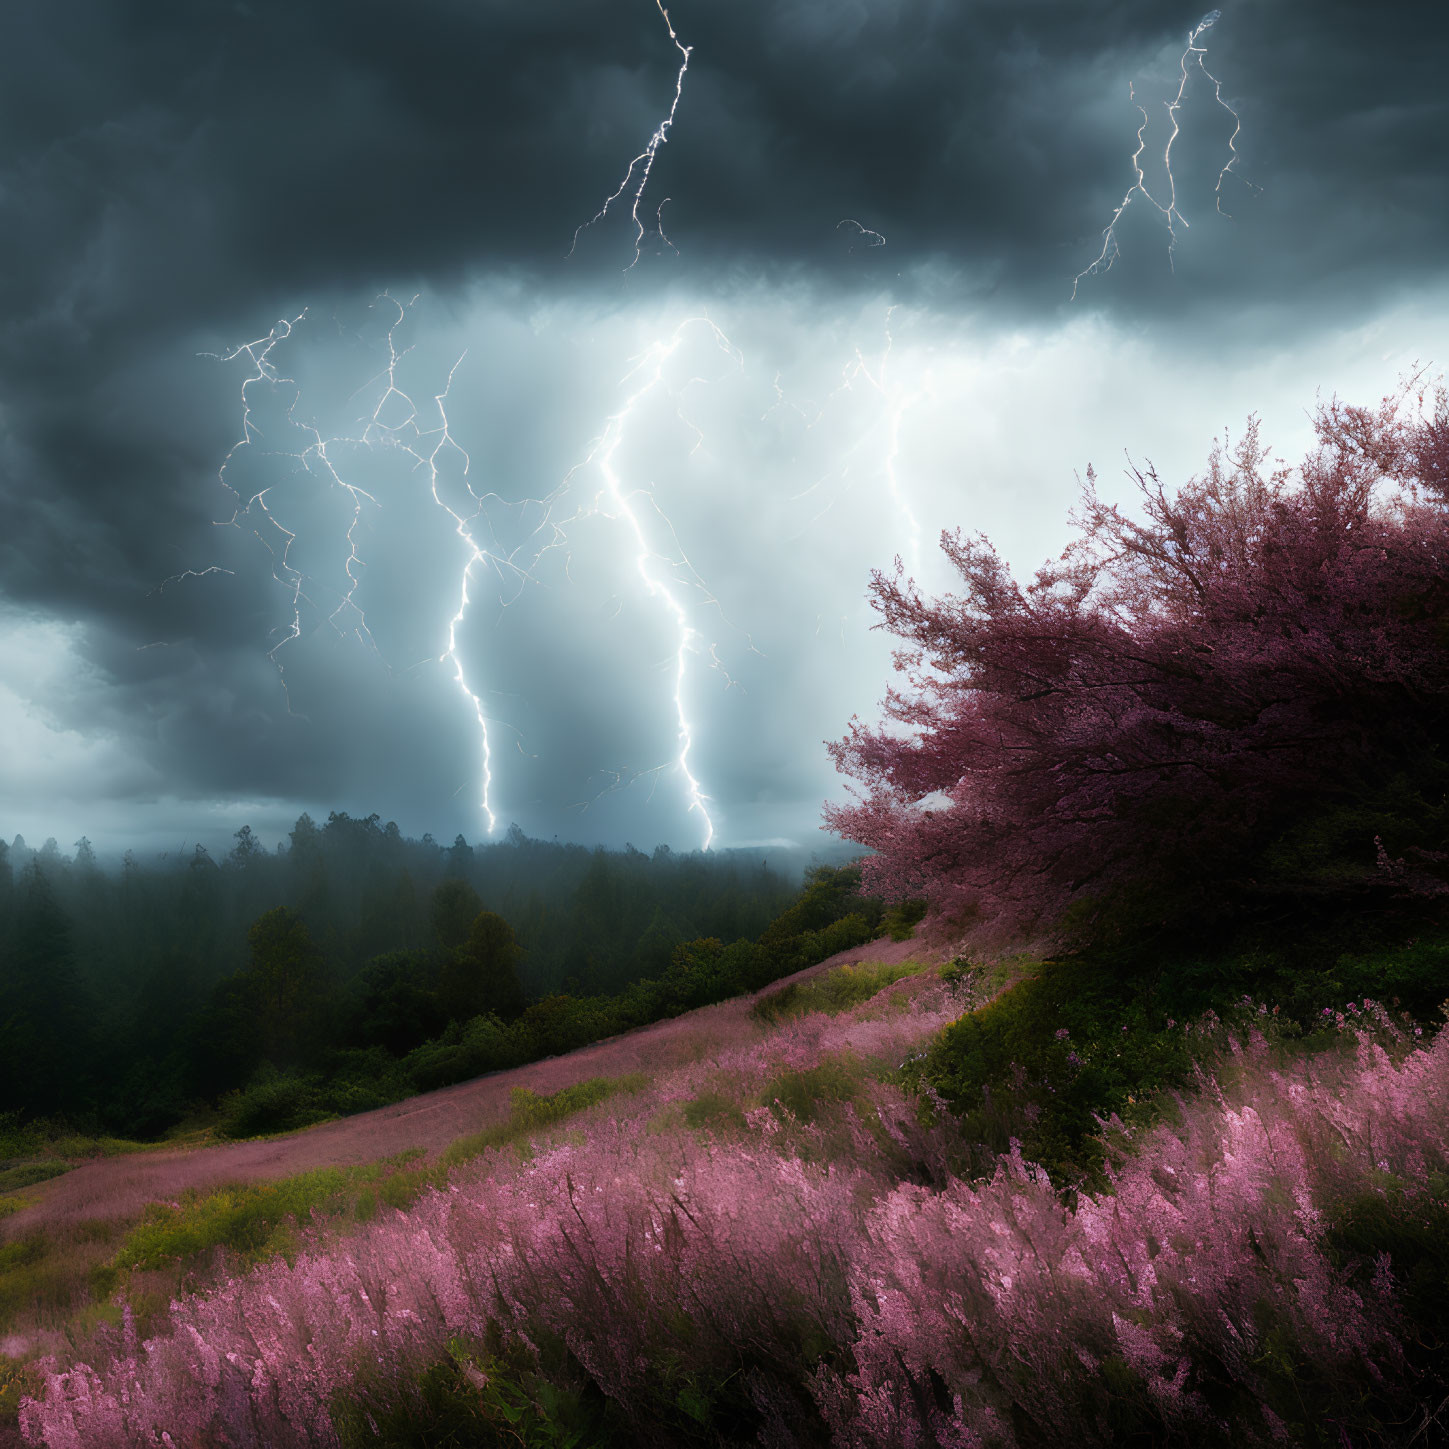 Dark stormy sky with multiple lightning strikes above vibrant pink and purple landscape